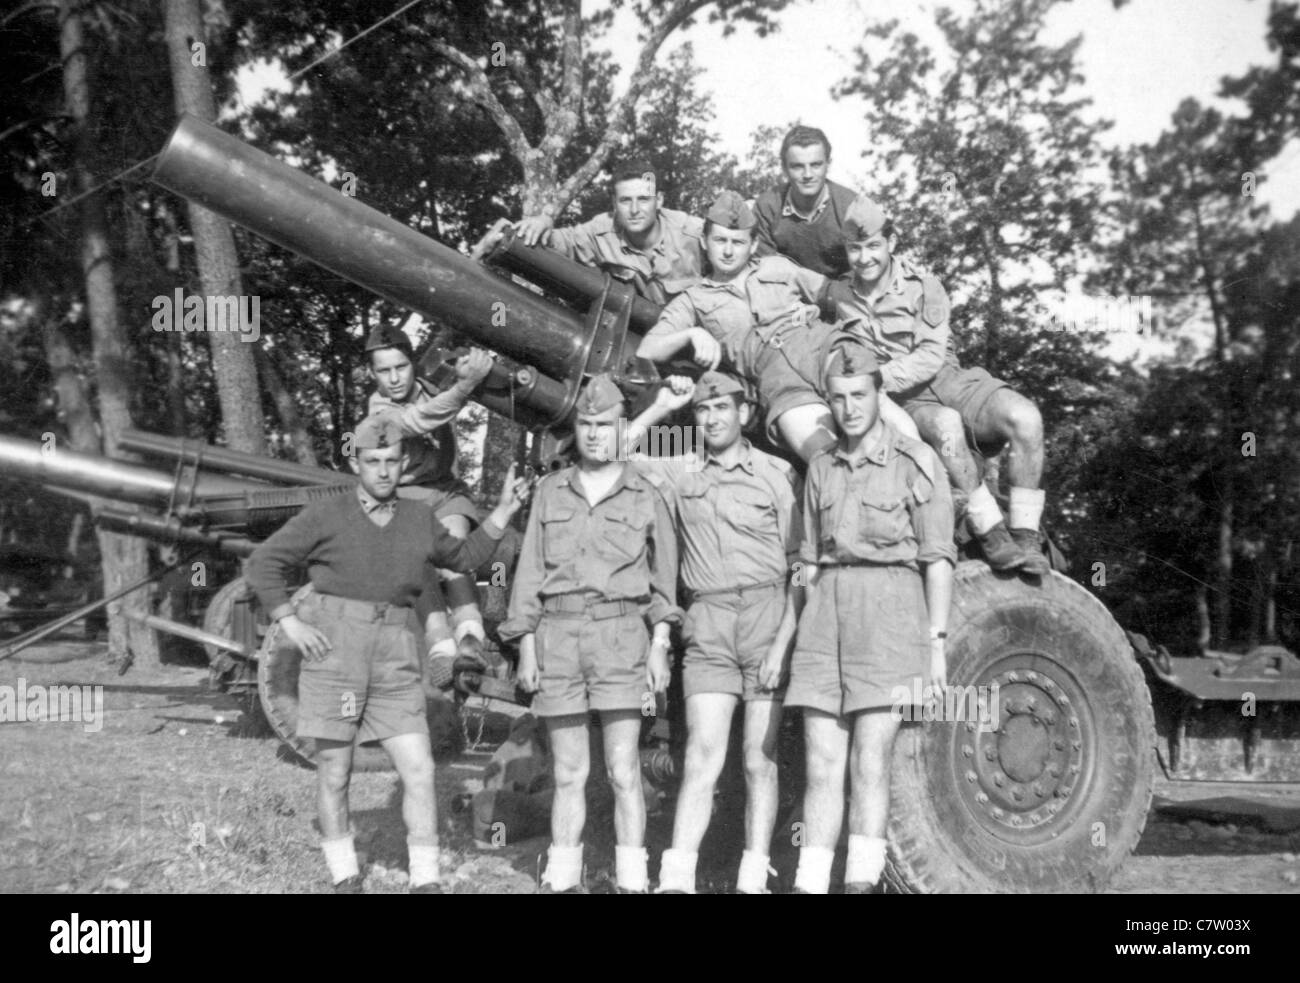 Italy, 1950's. Group of soldiers Stock Photo